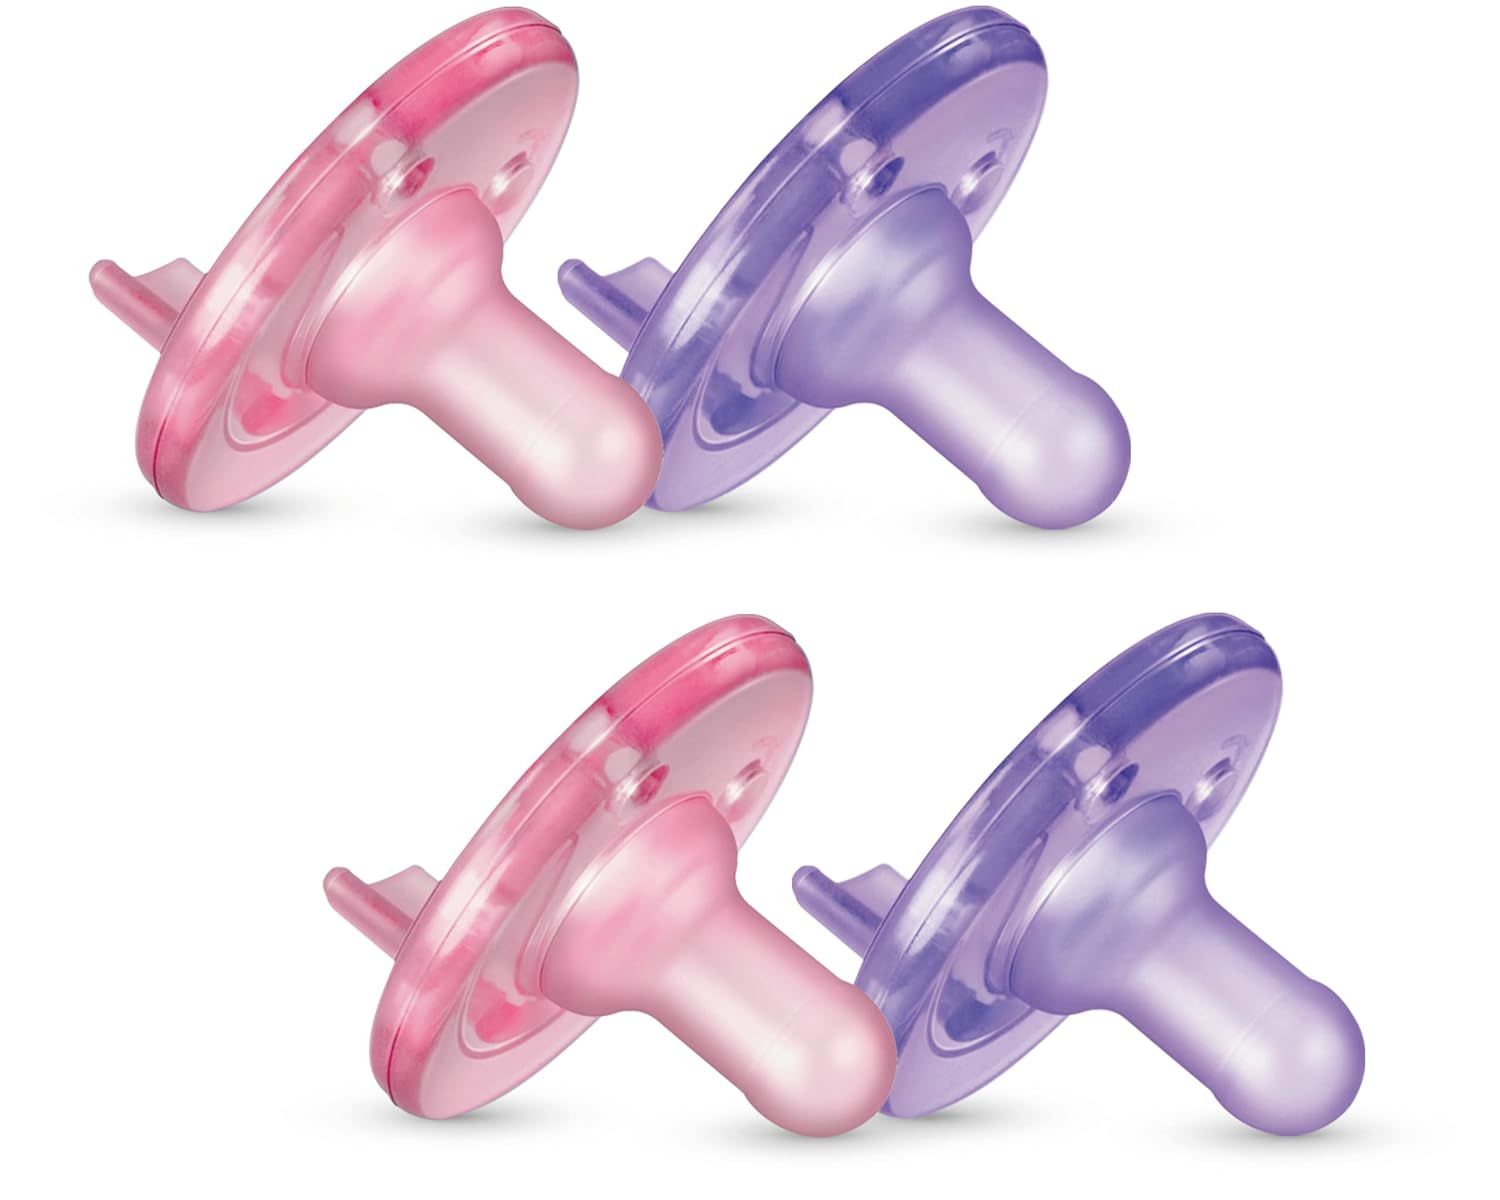 Philips AVENT Soothie Pacifier, Pink/Purple, 0-3 Months, 4 Pack, SCF190/42 | Amazon (US)